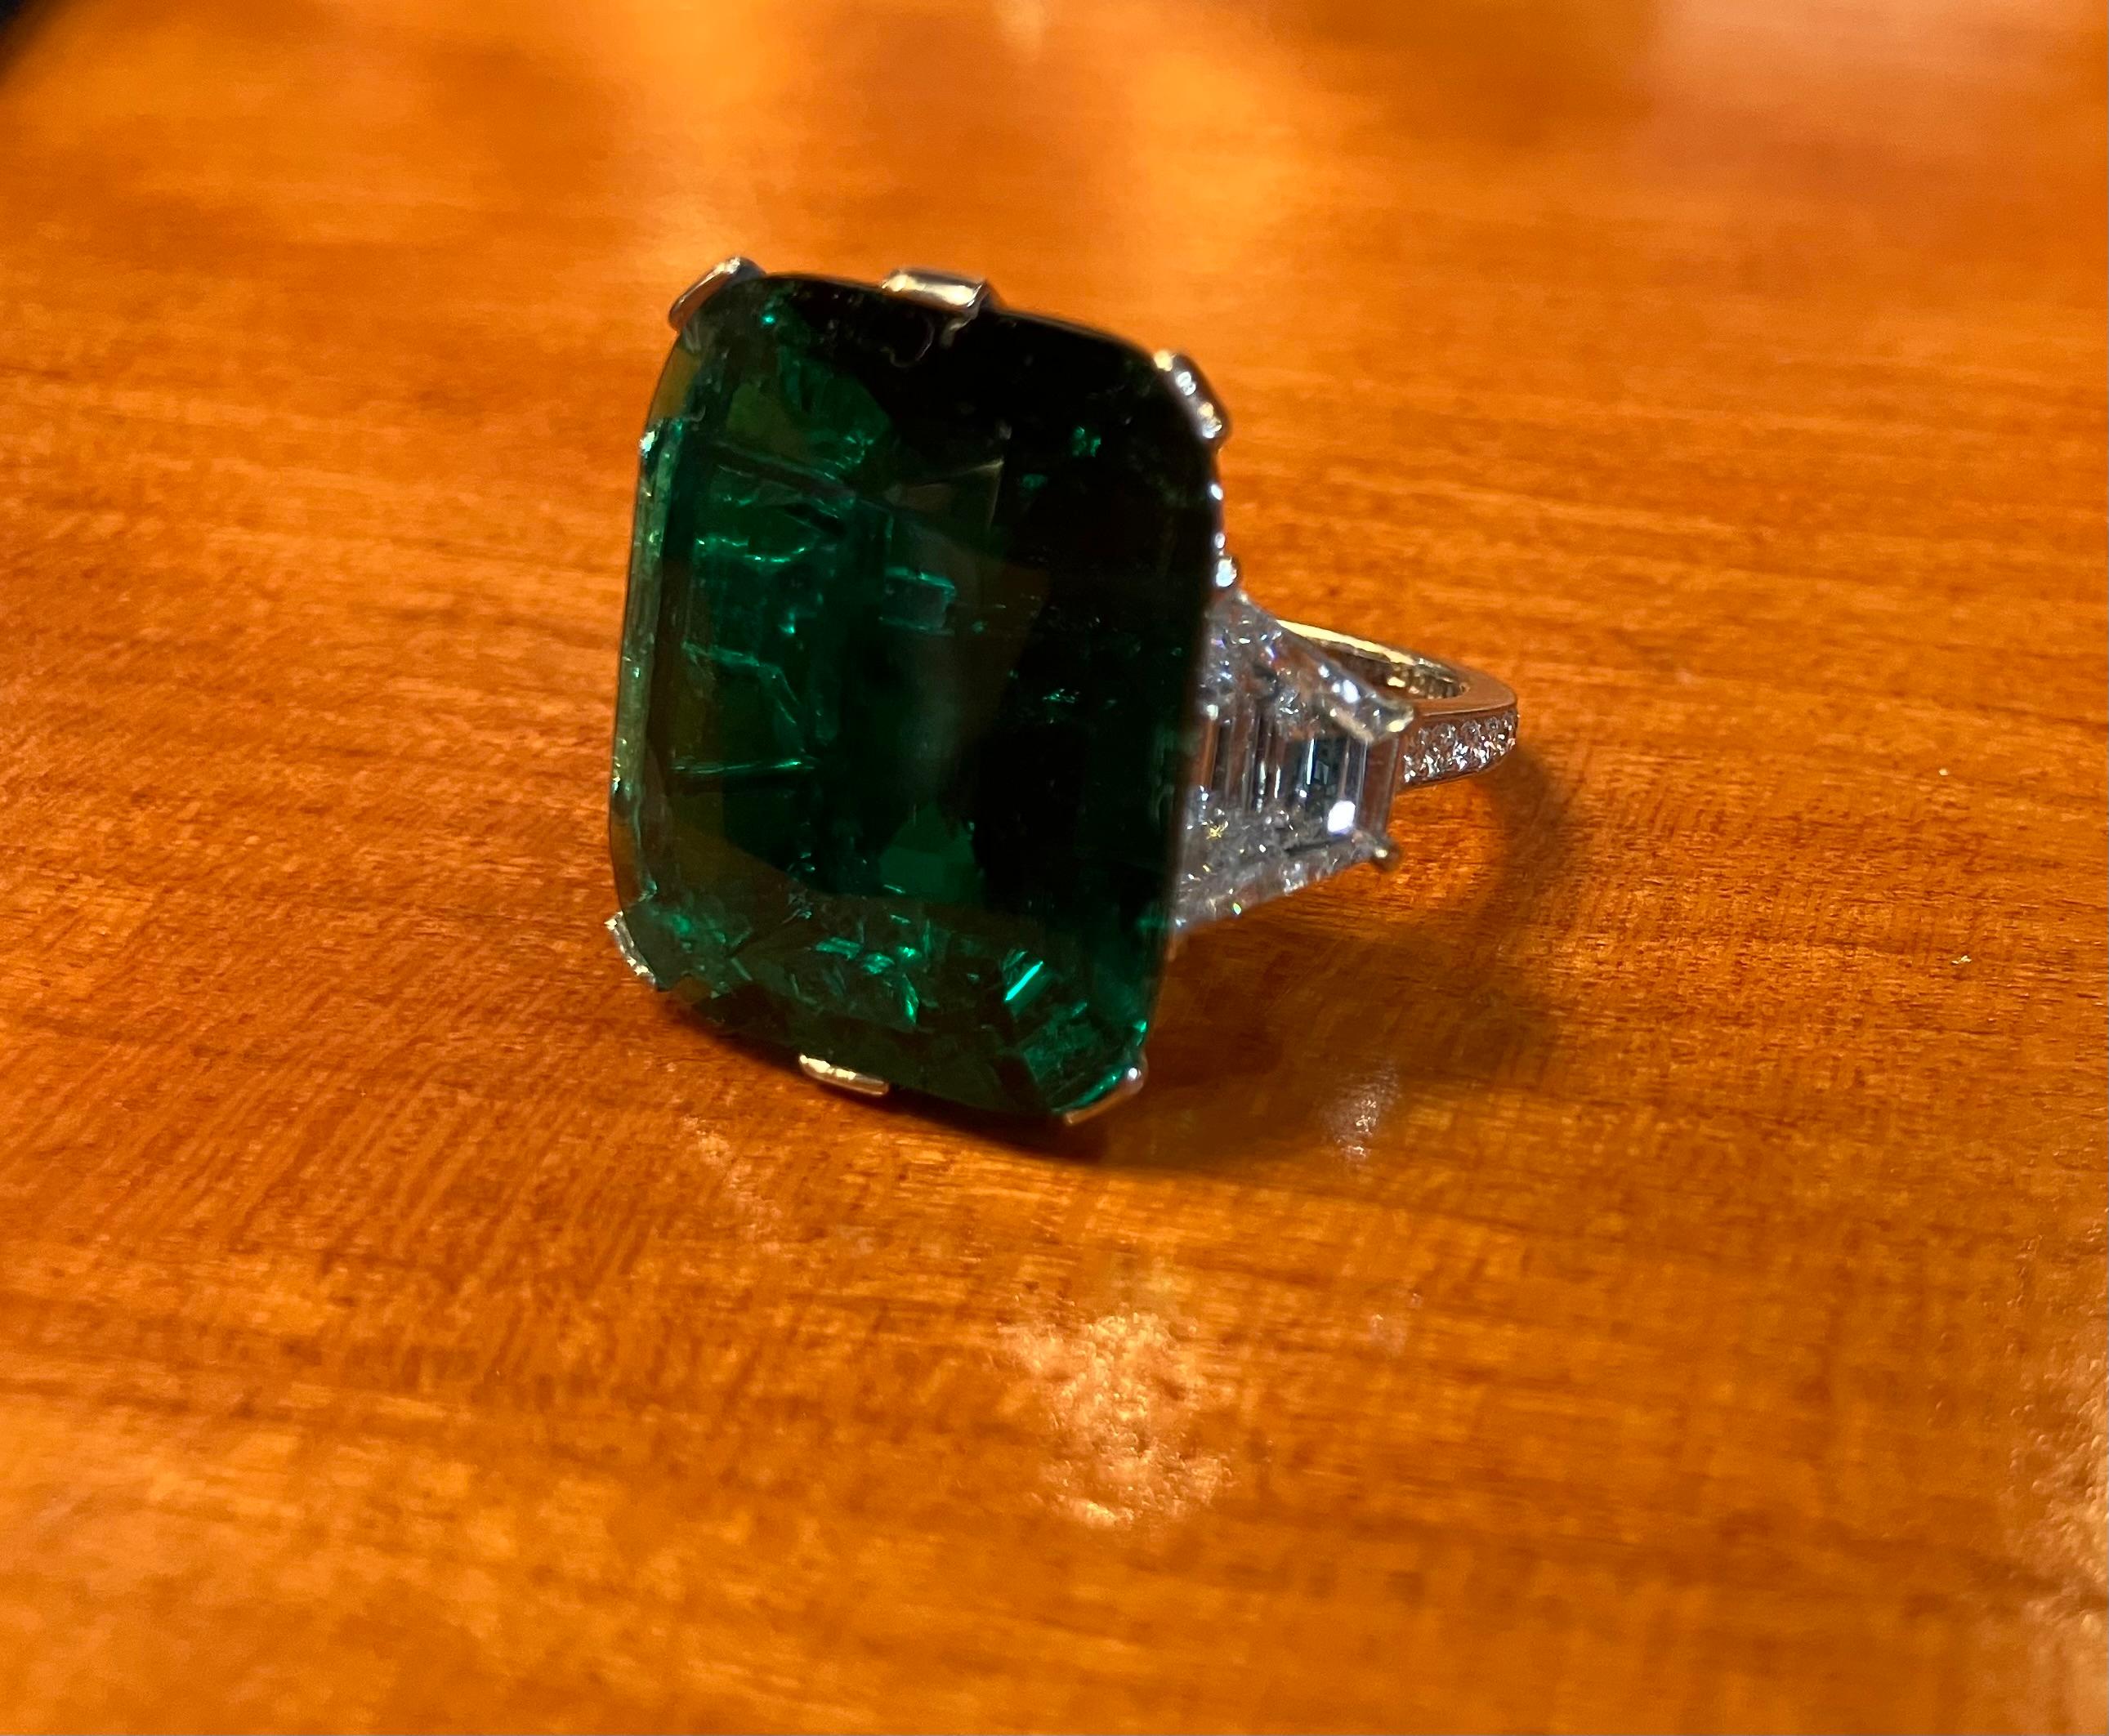 Exceptionally rare once in a lifetime oppertunity to own a Gem this caliber One-Of-A-Kind No Oil AGL Certified Colombian Emerald 17.61 Carats.!